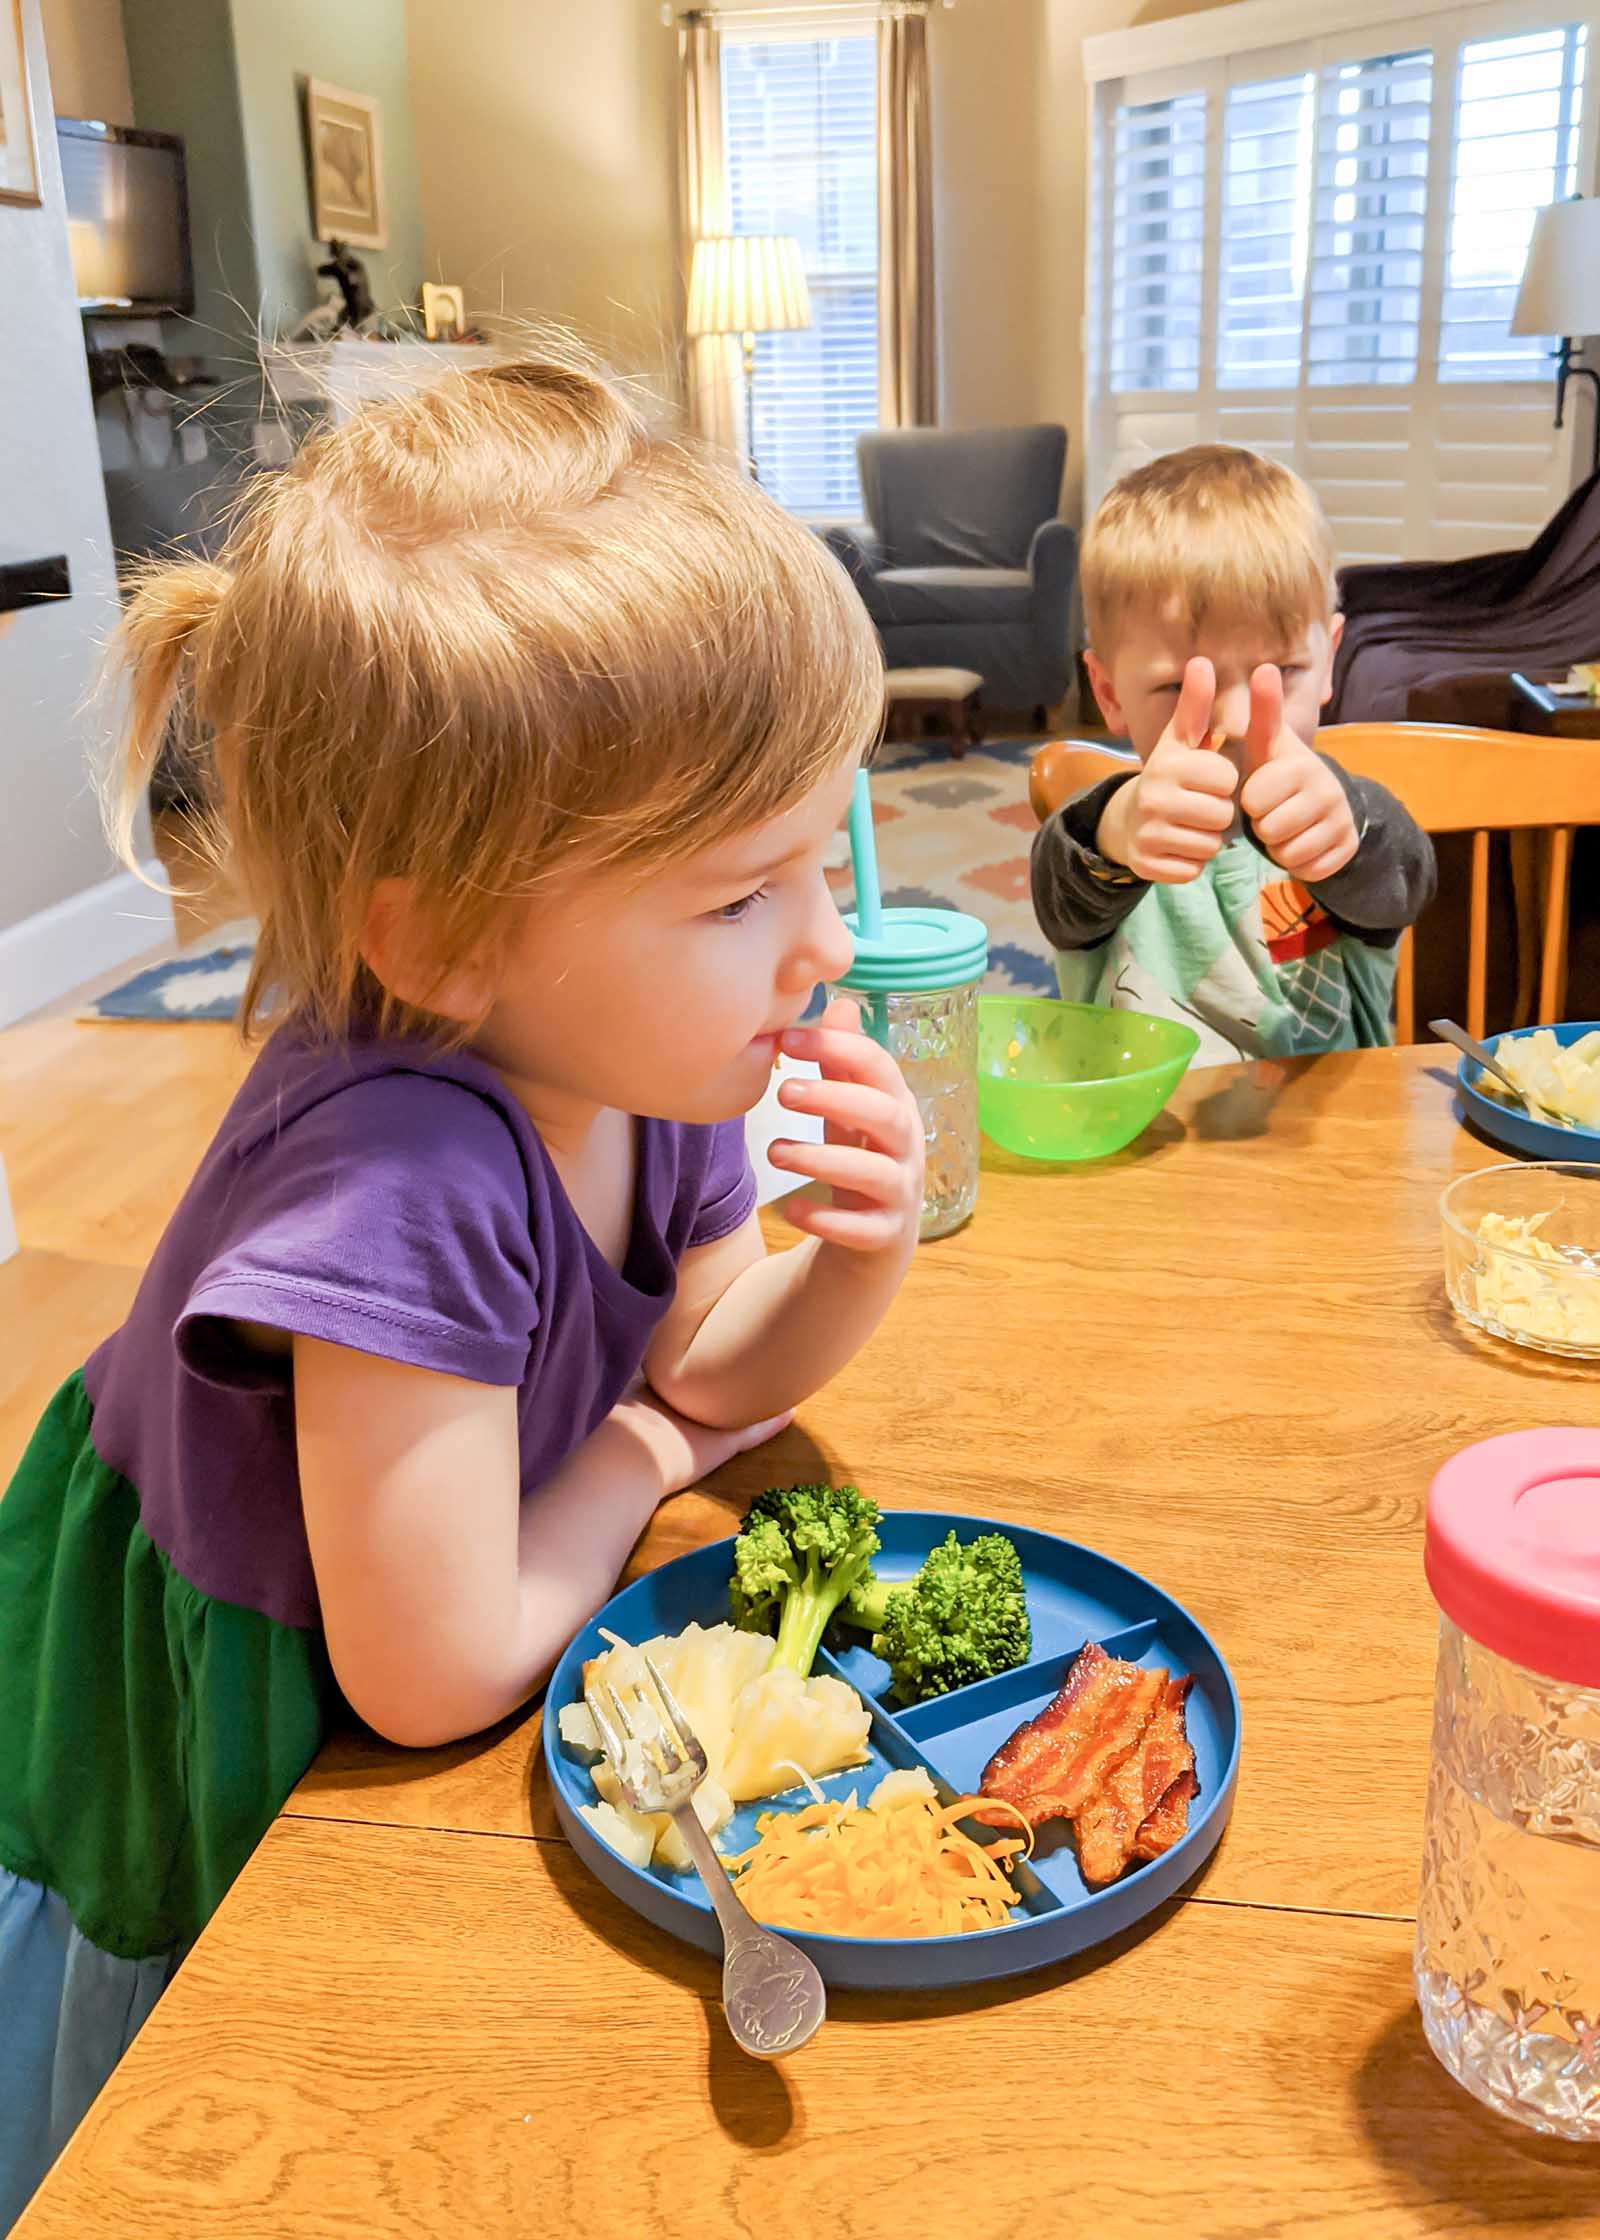 A young girl and boy are sitting at a kitchen table with plates and drinks in front of them. One plate is split into four sections. Each section has one type of food on it. Bacon, shredded cheddar cheese, mashed potato and cooked broccoli is on the plate. The boy is giving a thumbs up sign at his chair.